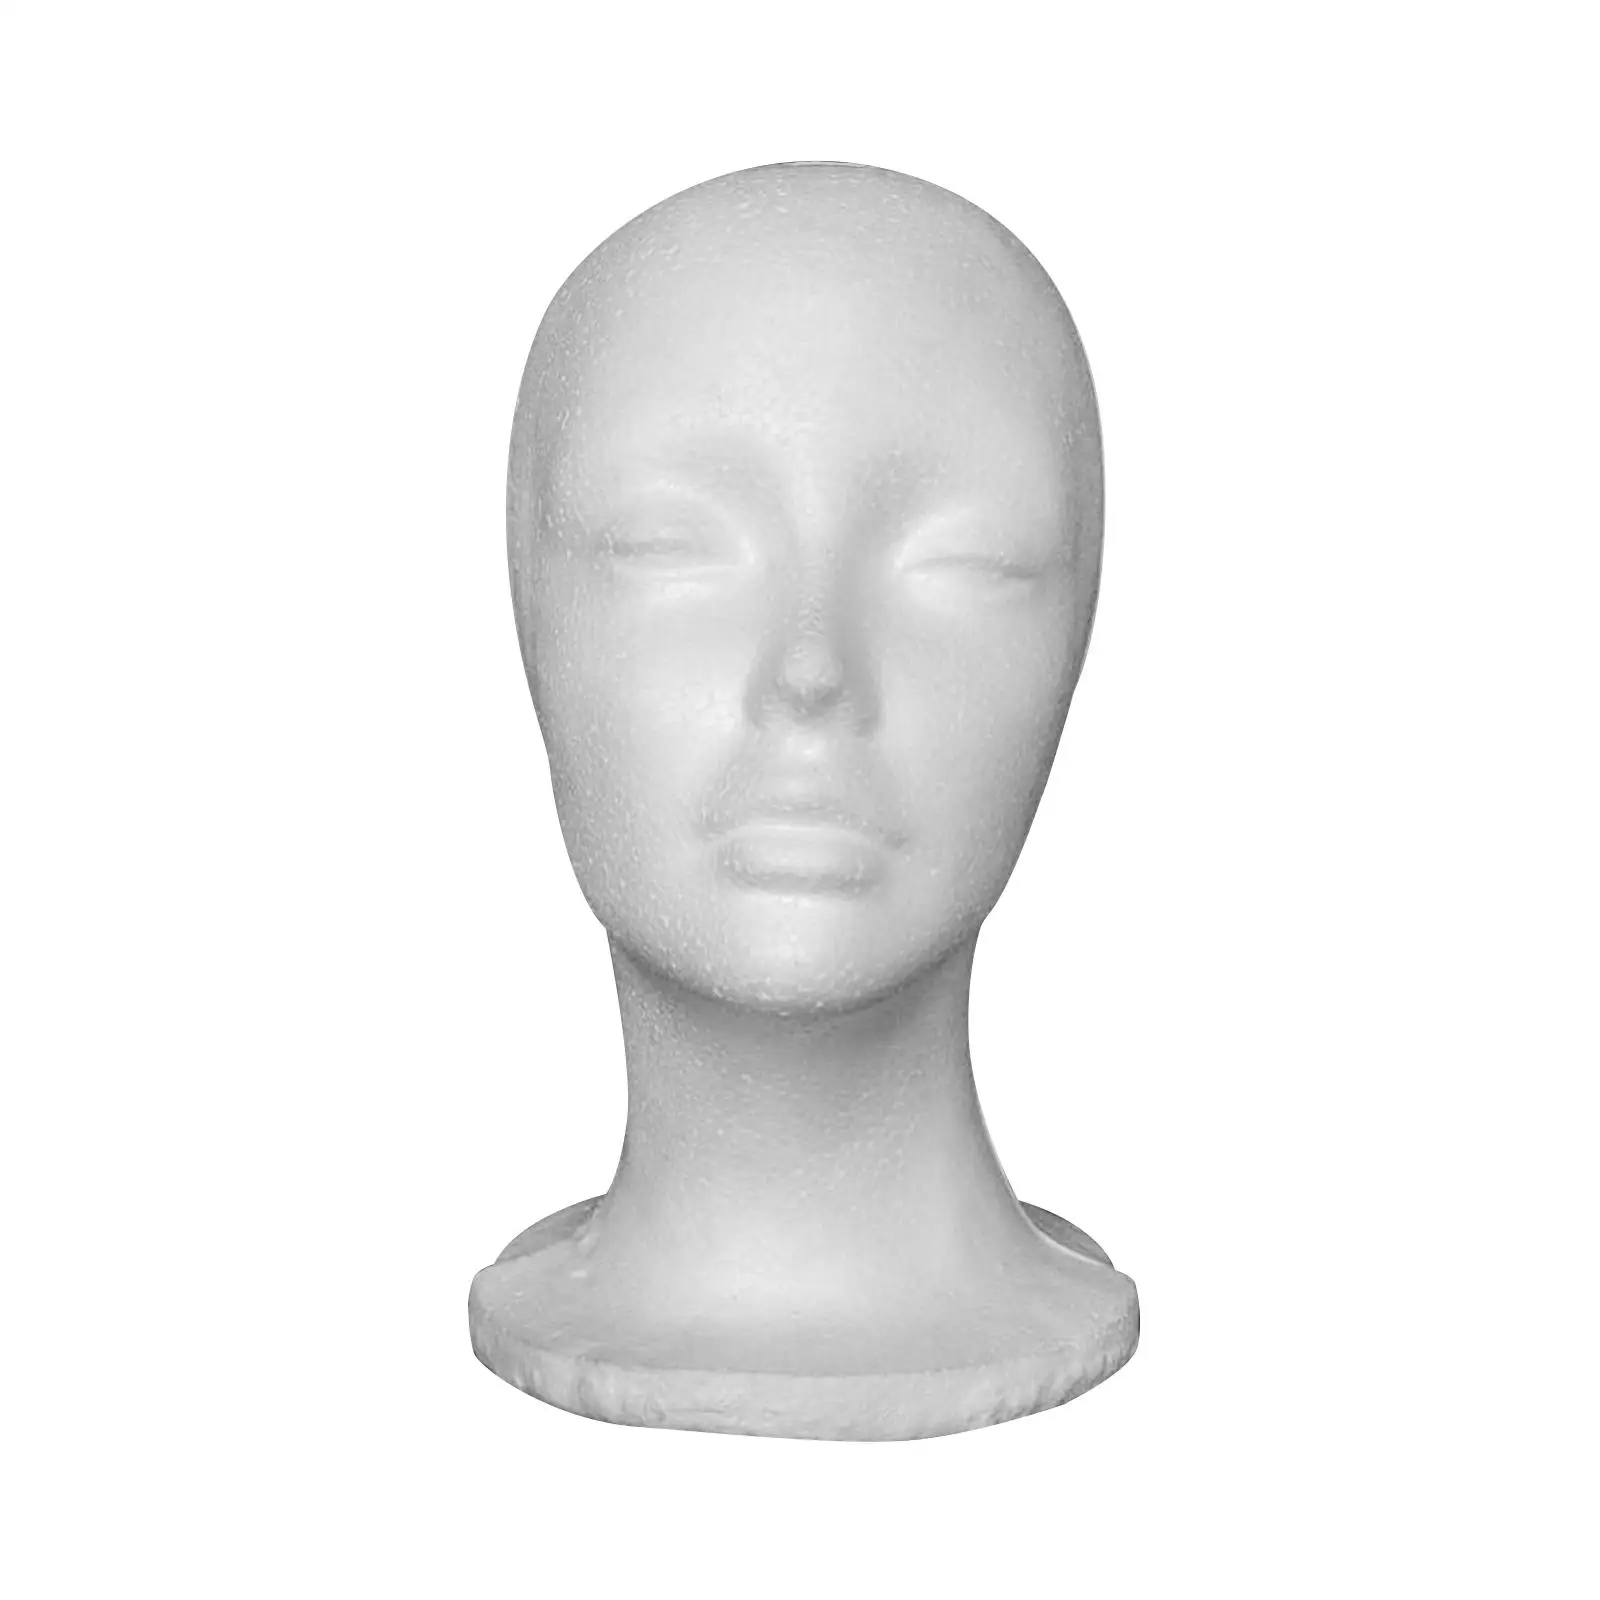 Foam Mannequin Head Multi Functional Hair Hat Display Holder Stand Hairpiece Stand Foam Mannequin Head Display for Props Salon